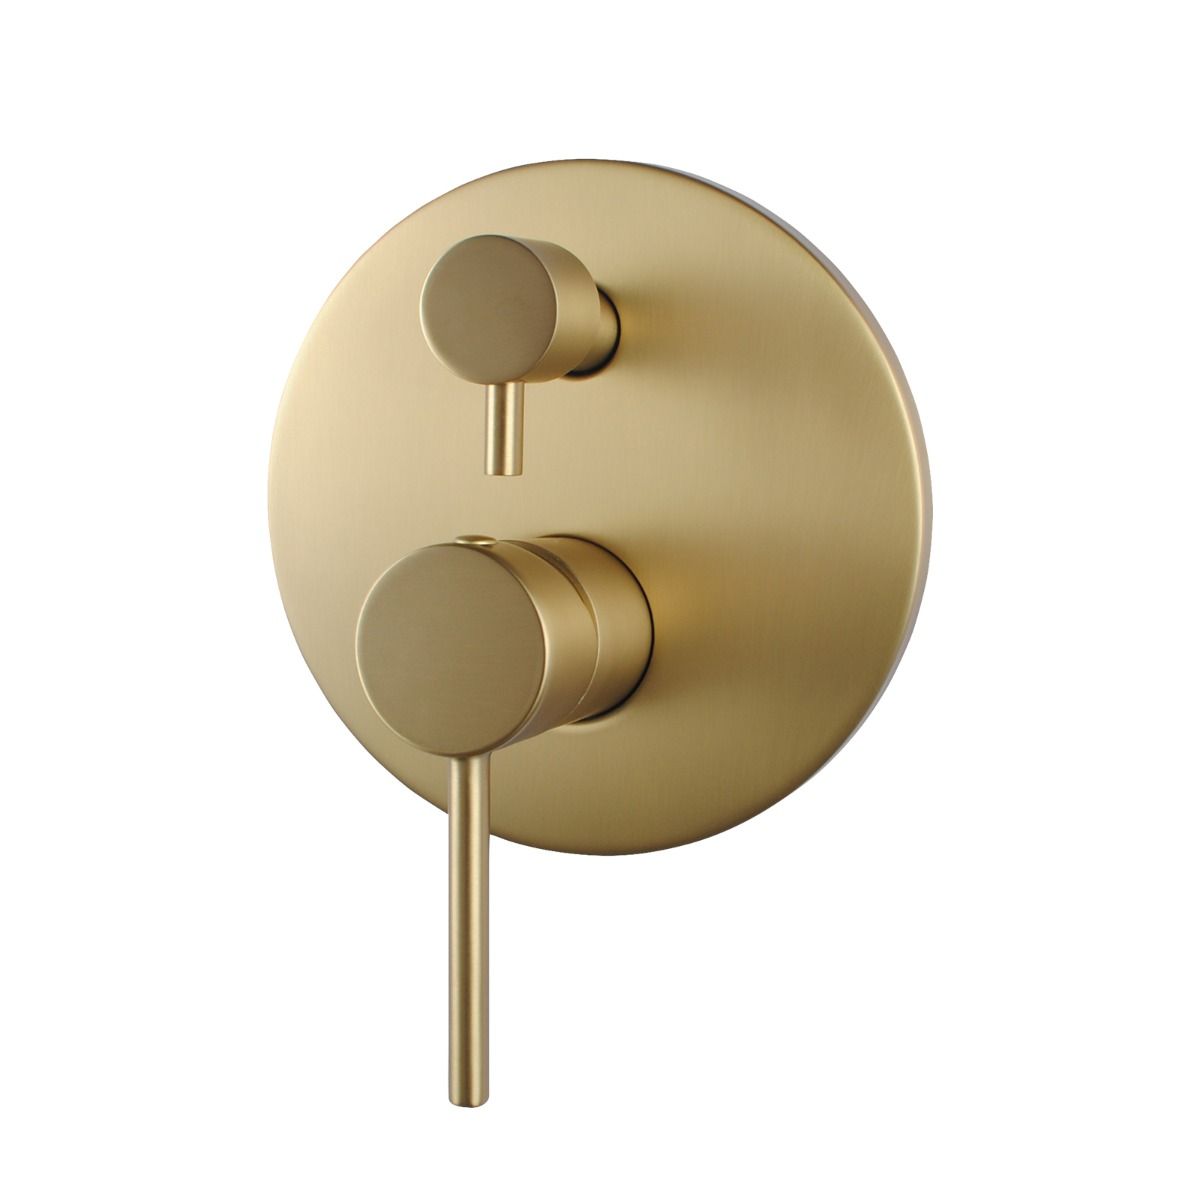 Norico Pentro Brushed Yellow Gold Round Wall Mixer Tap with Diverter